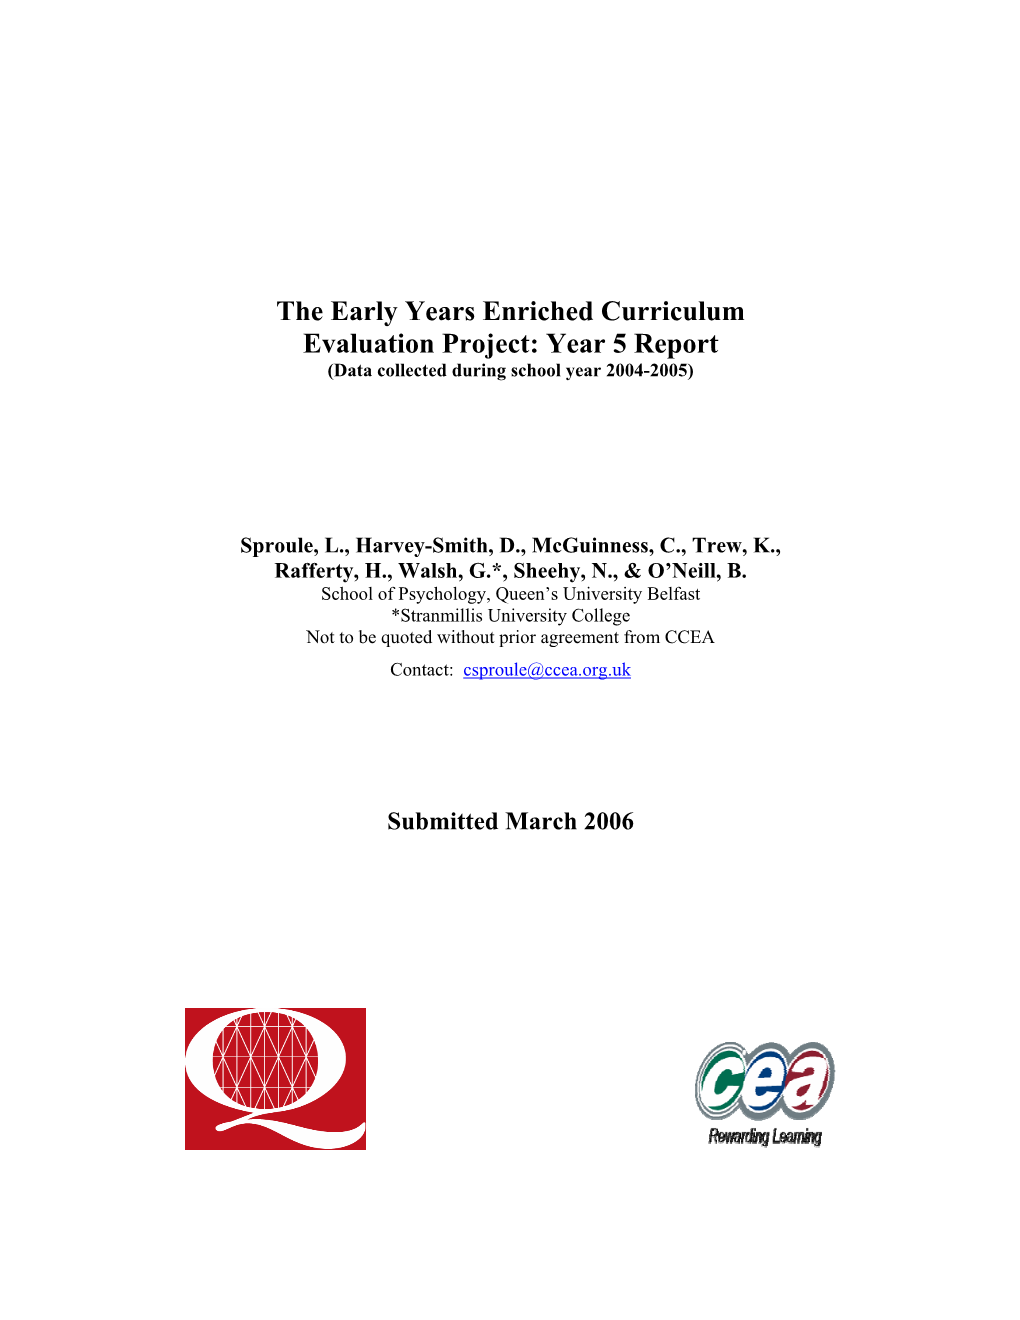 The Early Years Enriched Curriculum Evaluation Project: Year 5 Report (Data Collected During School Year 2004-2005)